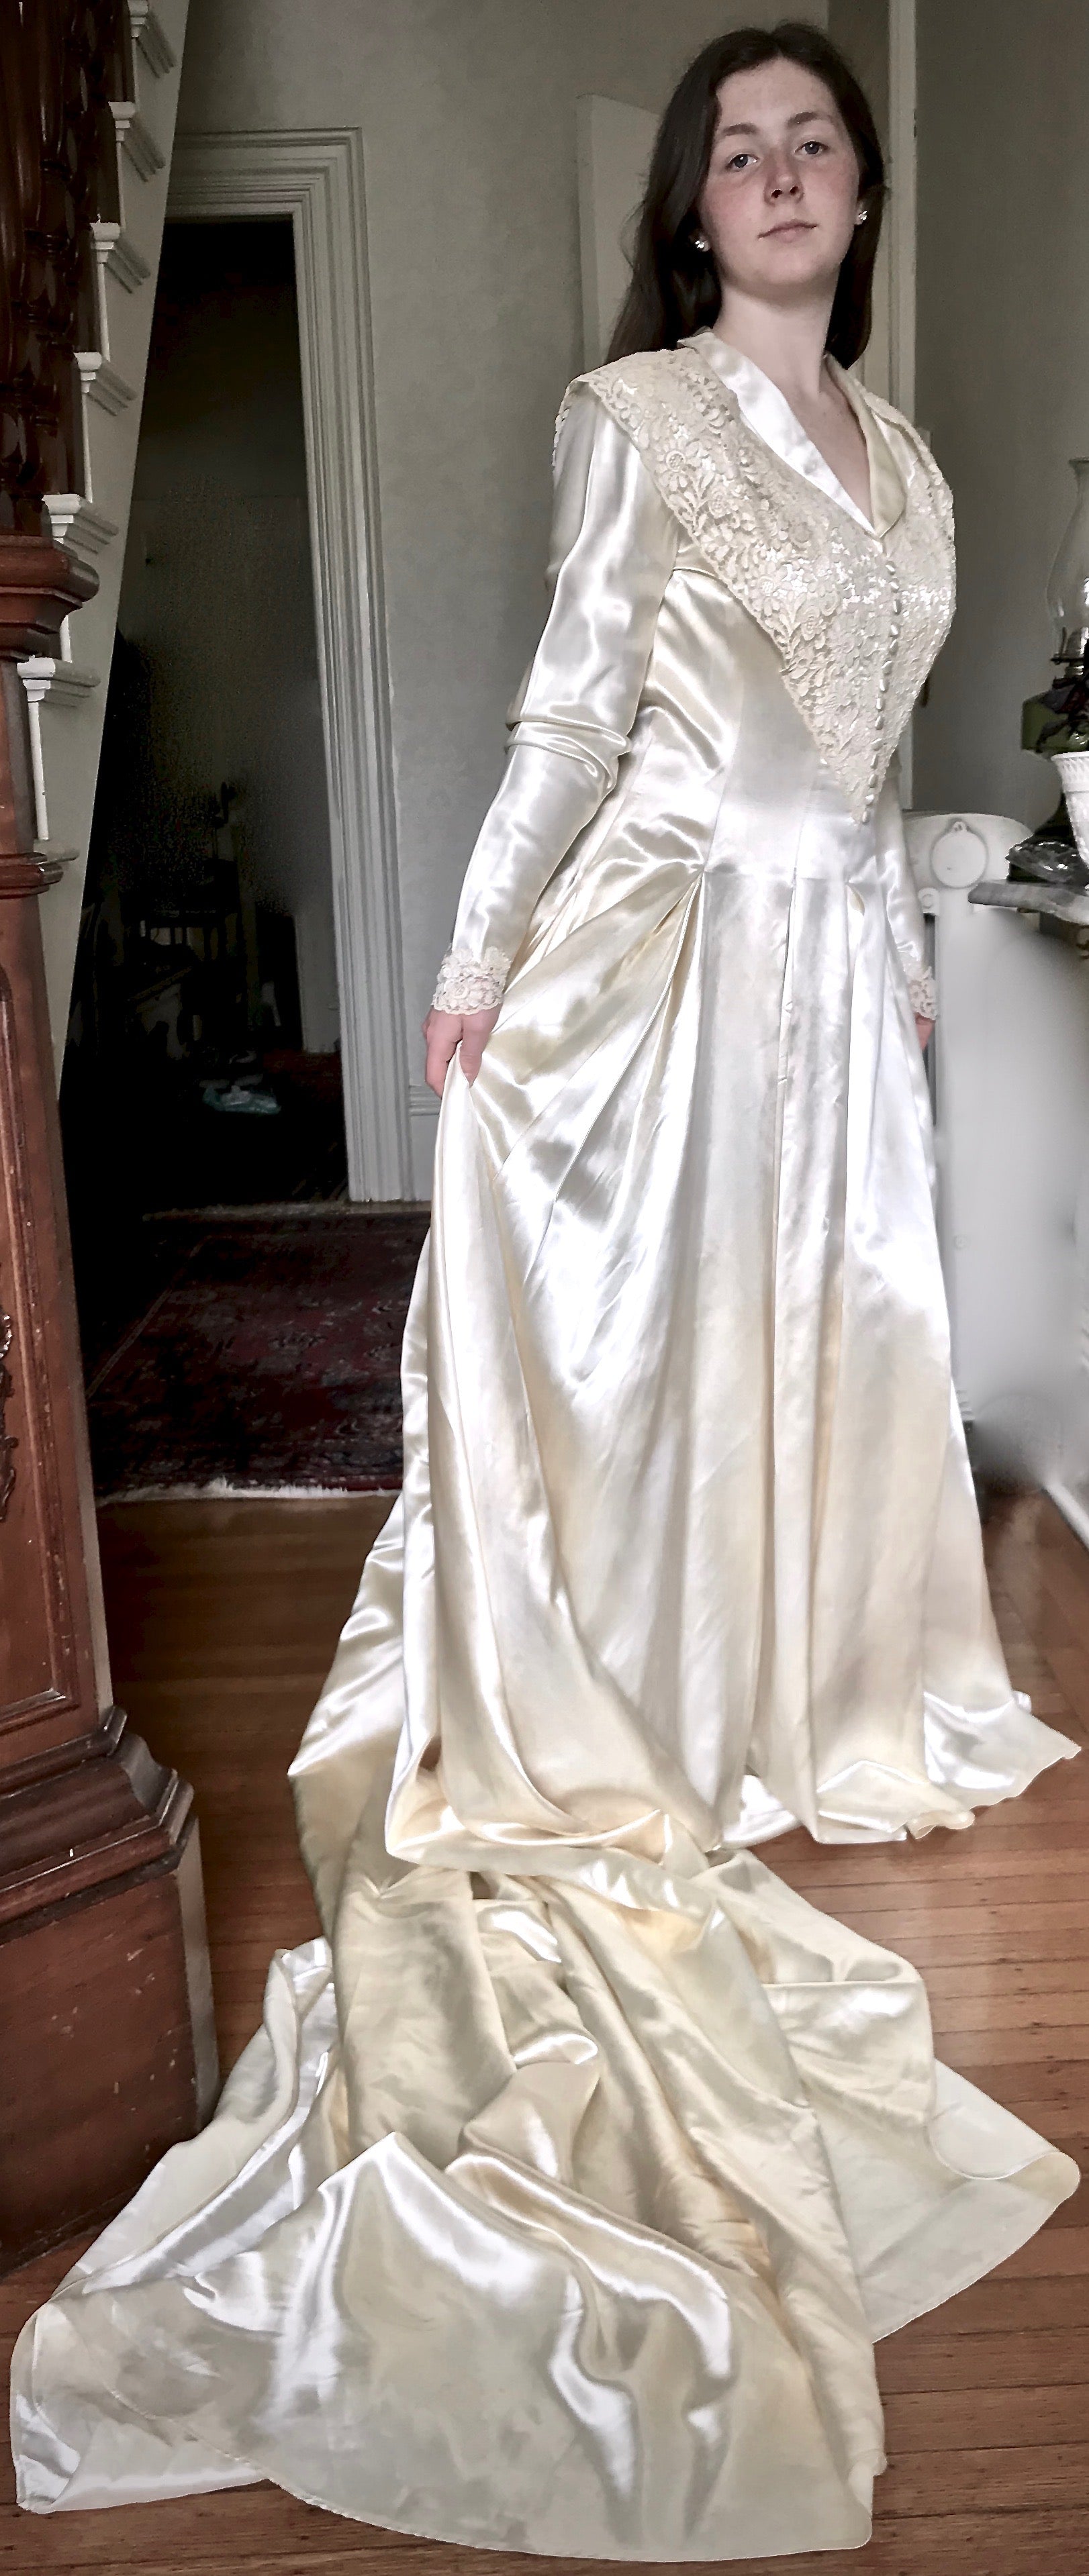 Vintage 1940’s Glamour, A Miriam of New York Original.  Ivory Liquid Satin & Lace Bias-Cut Fitted & Flared Gown.   A-Line Silhouette with substantial "Monarch" train